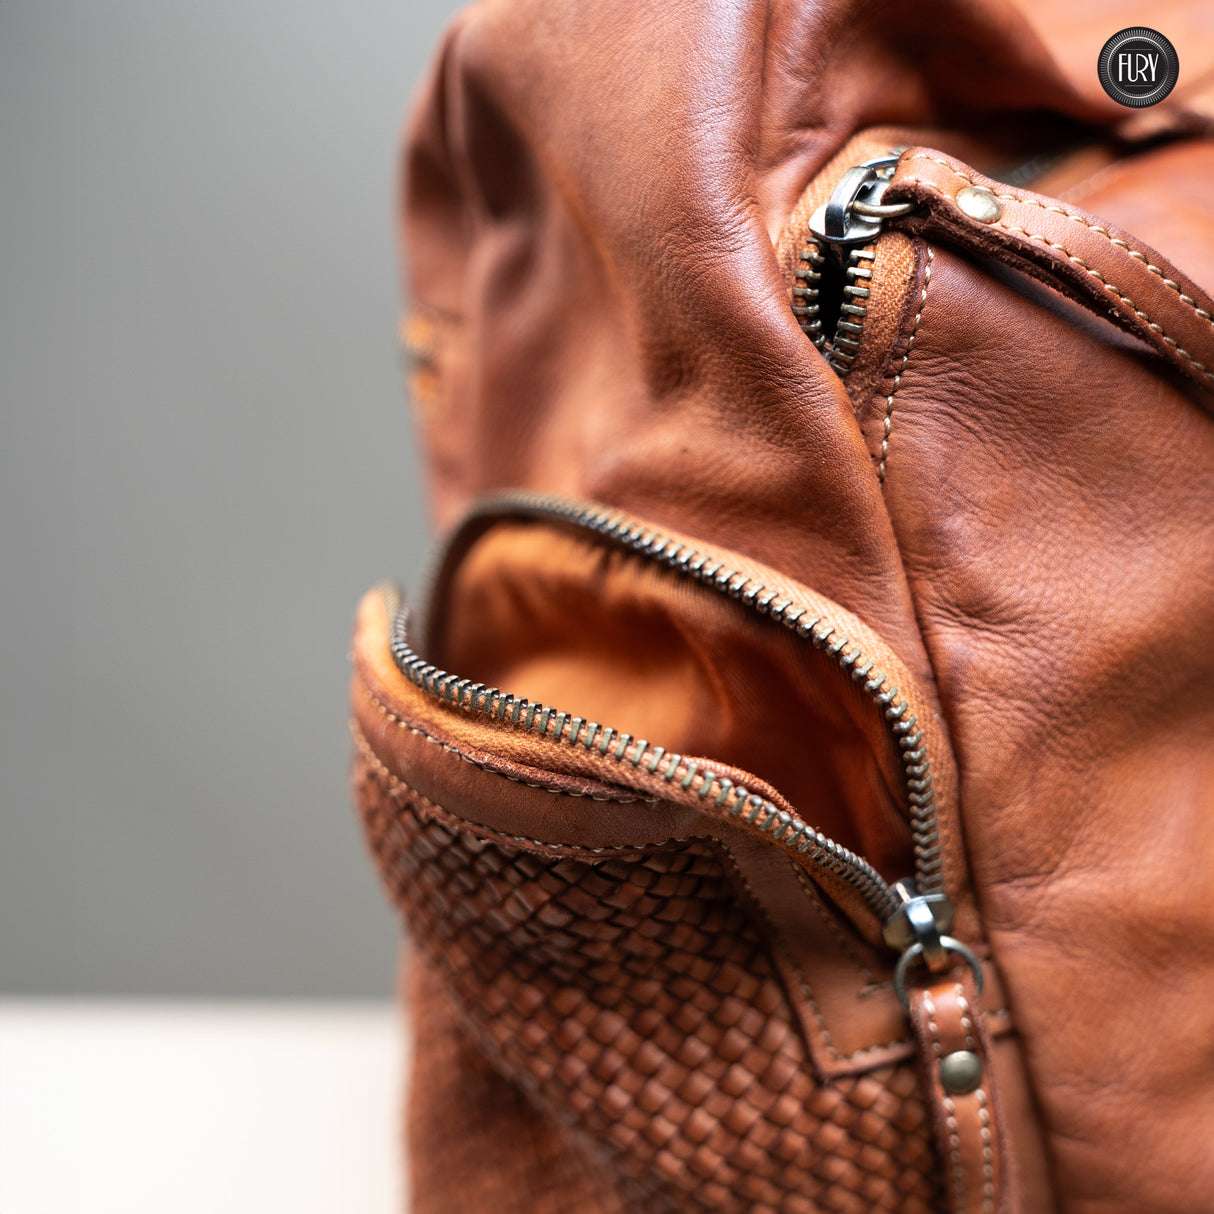 Multi-pocket backpack in woven leather